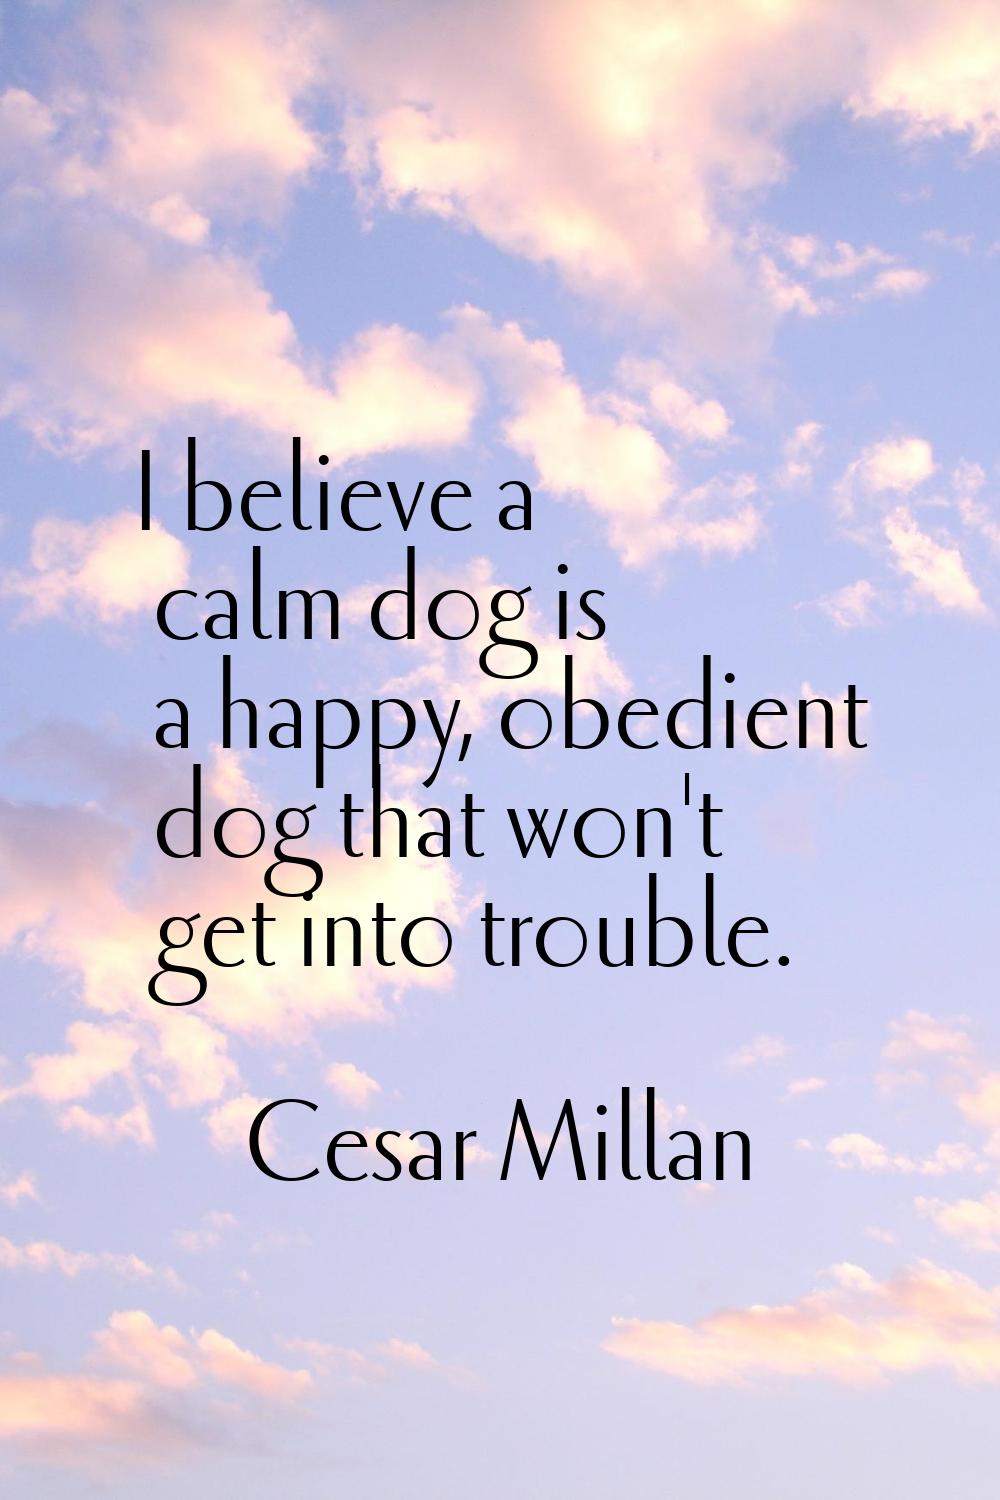 I believe a calm dog is a happy, obedient dog that won't get into trouble.